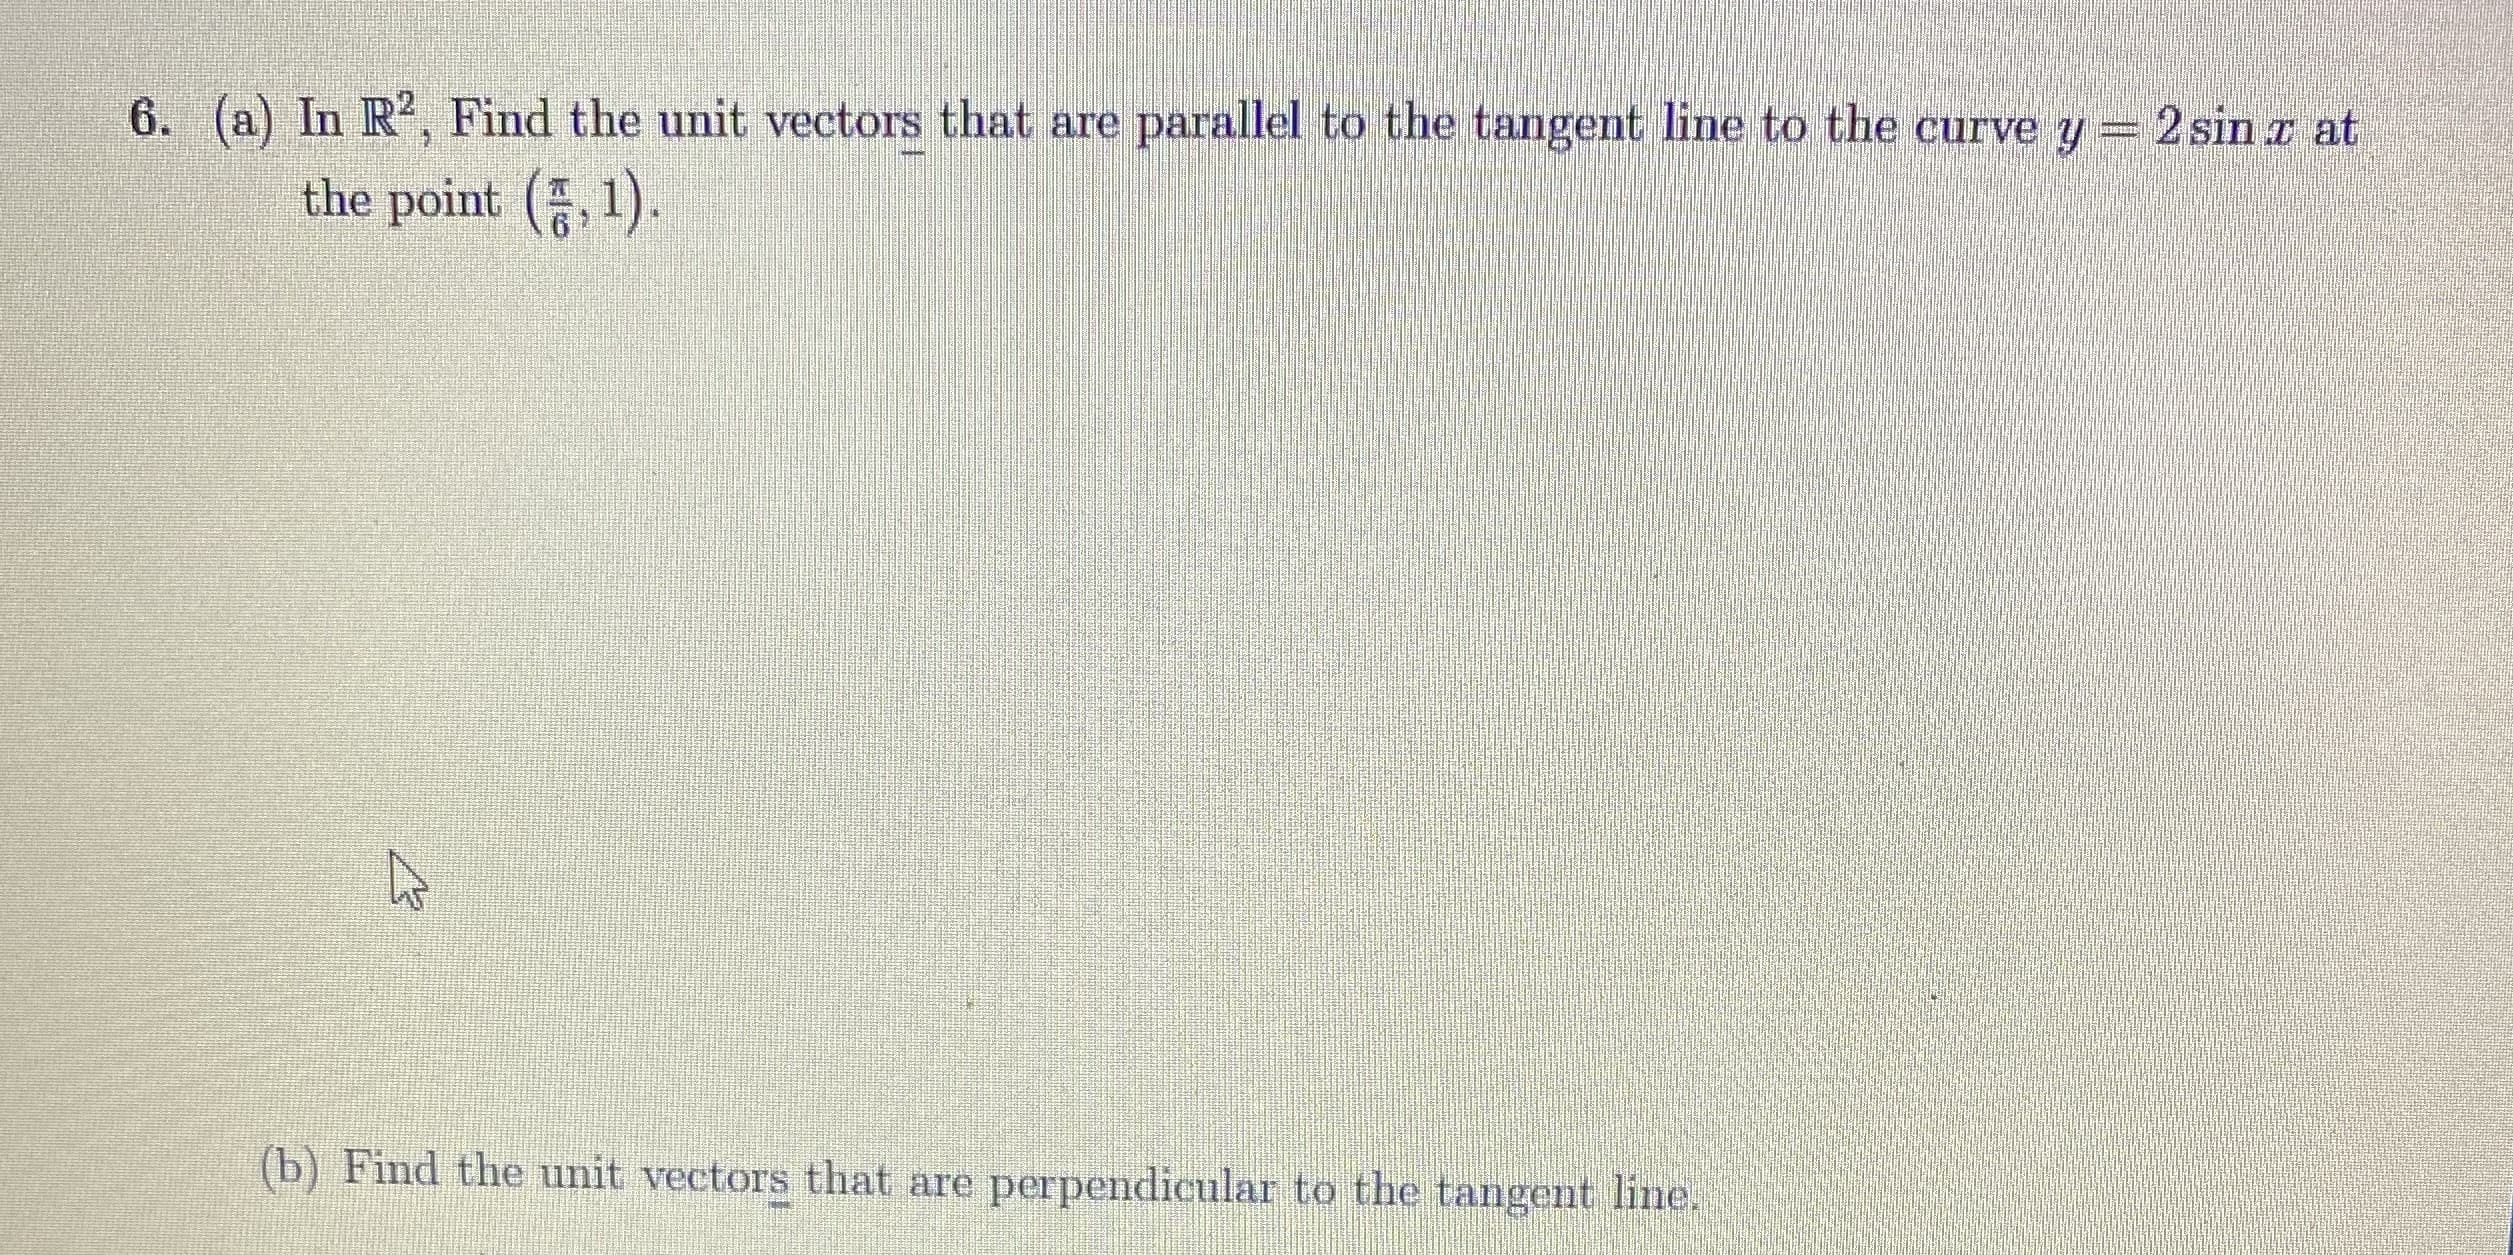 In R', Find the unit vectors that are parallel to the tangent line to the curve y = 2 sin x at
the point (, 1).
